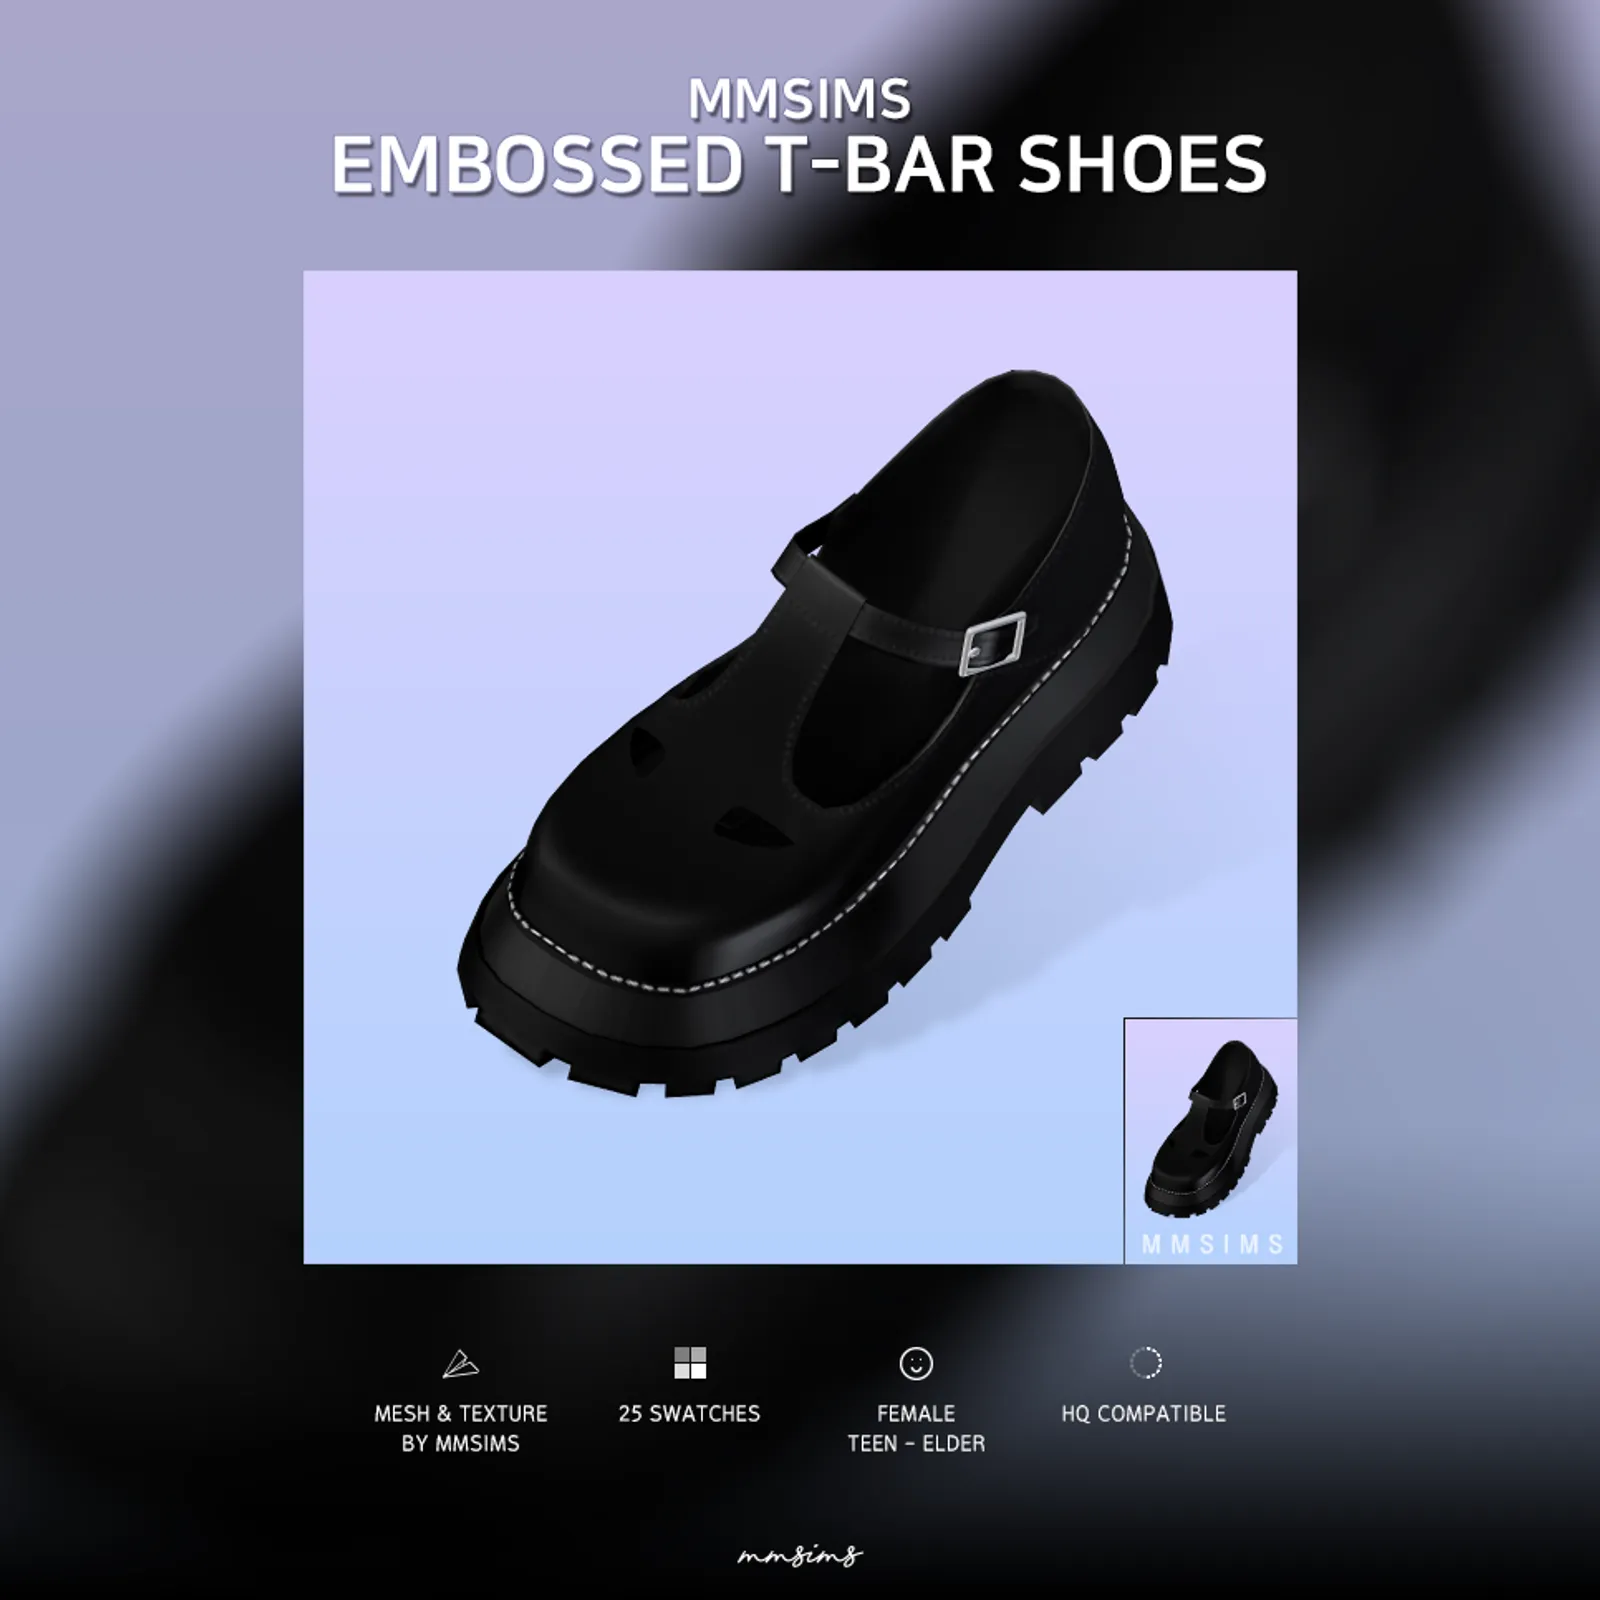 MMSIMS Embossed T-bar Shoes